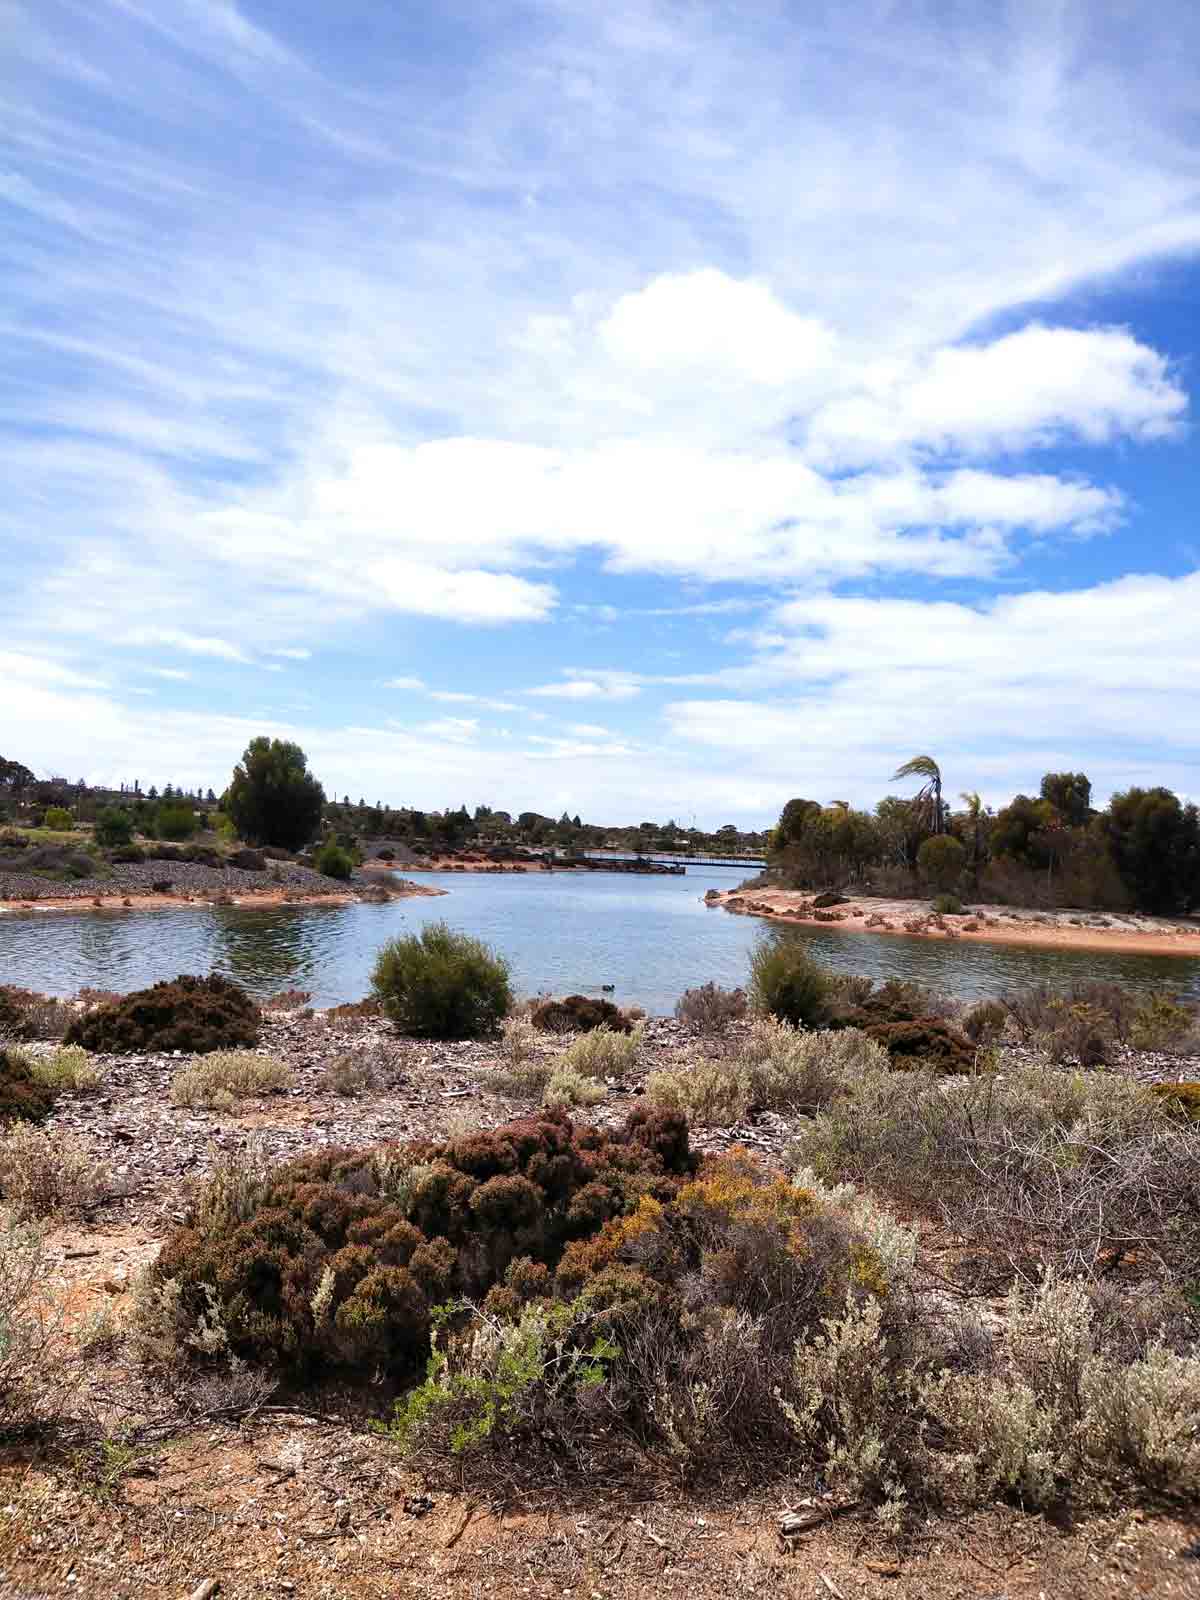 Whyalla Wetlands in the Eyre Peninsula, South Australia